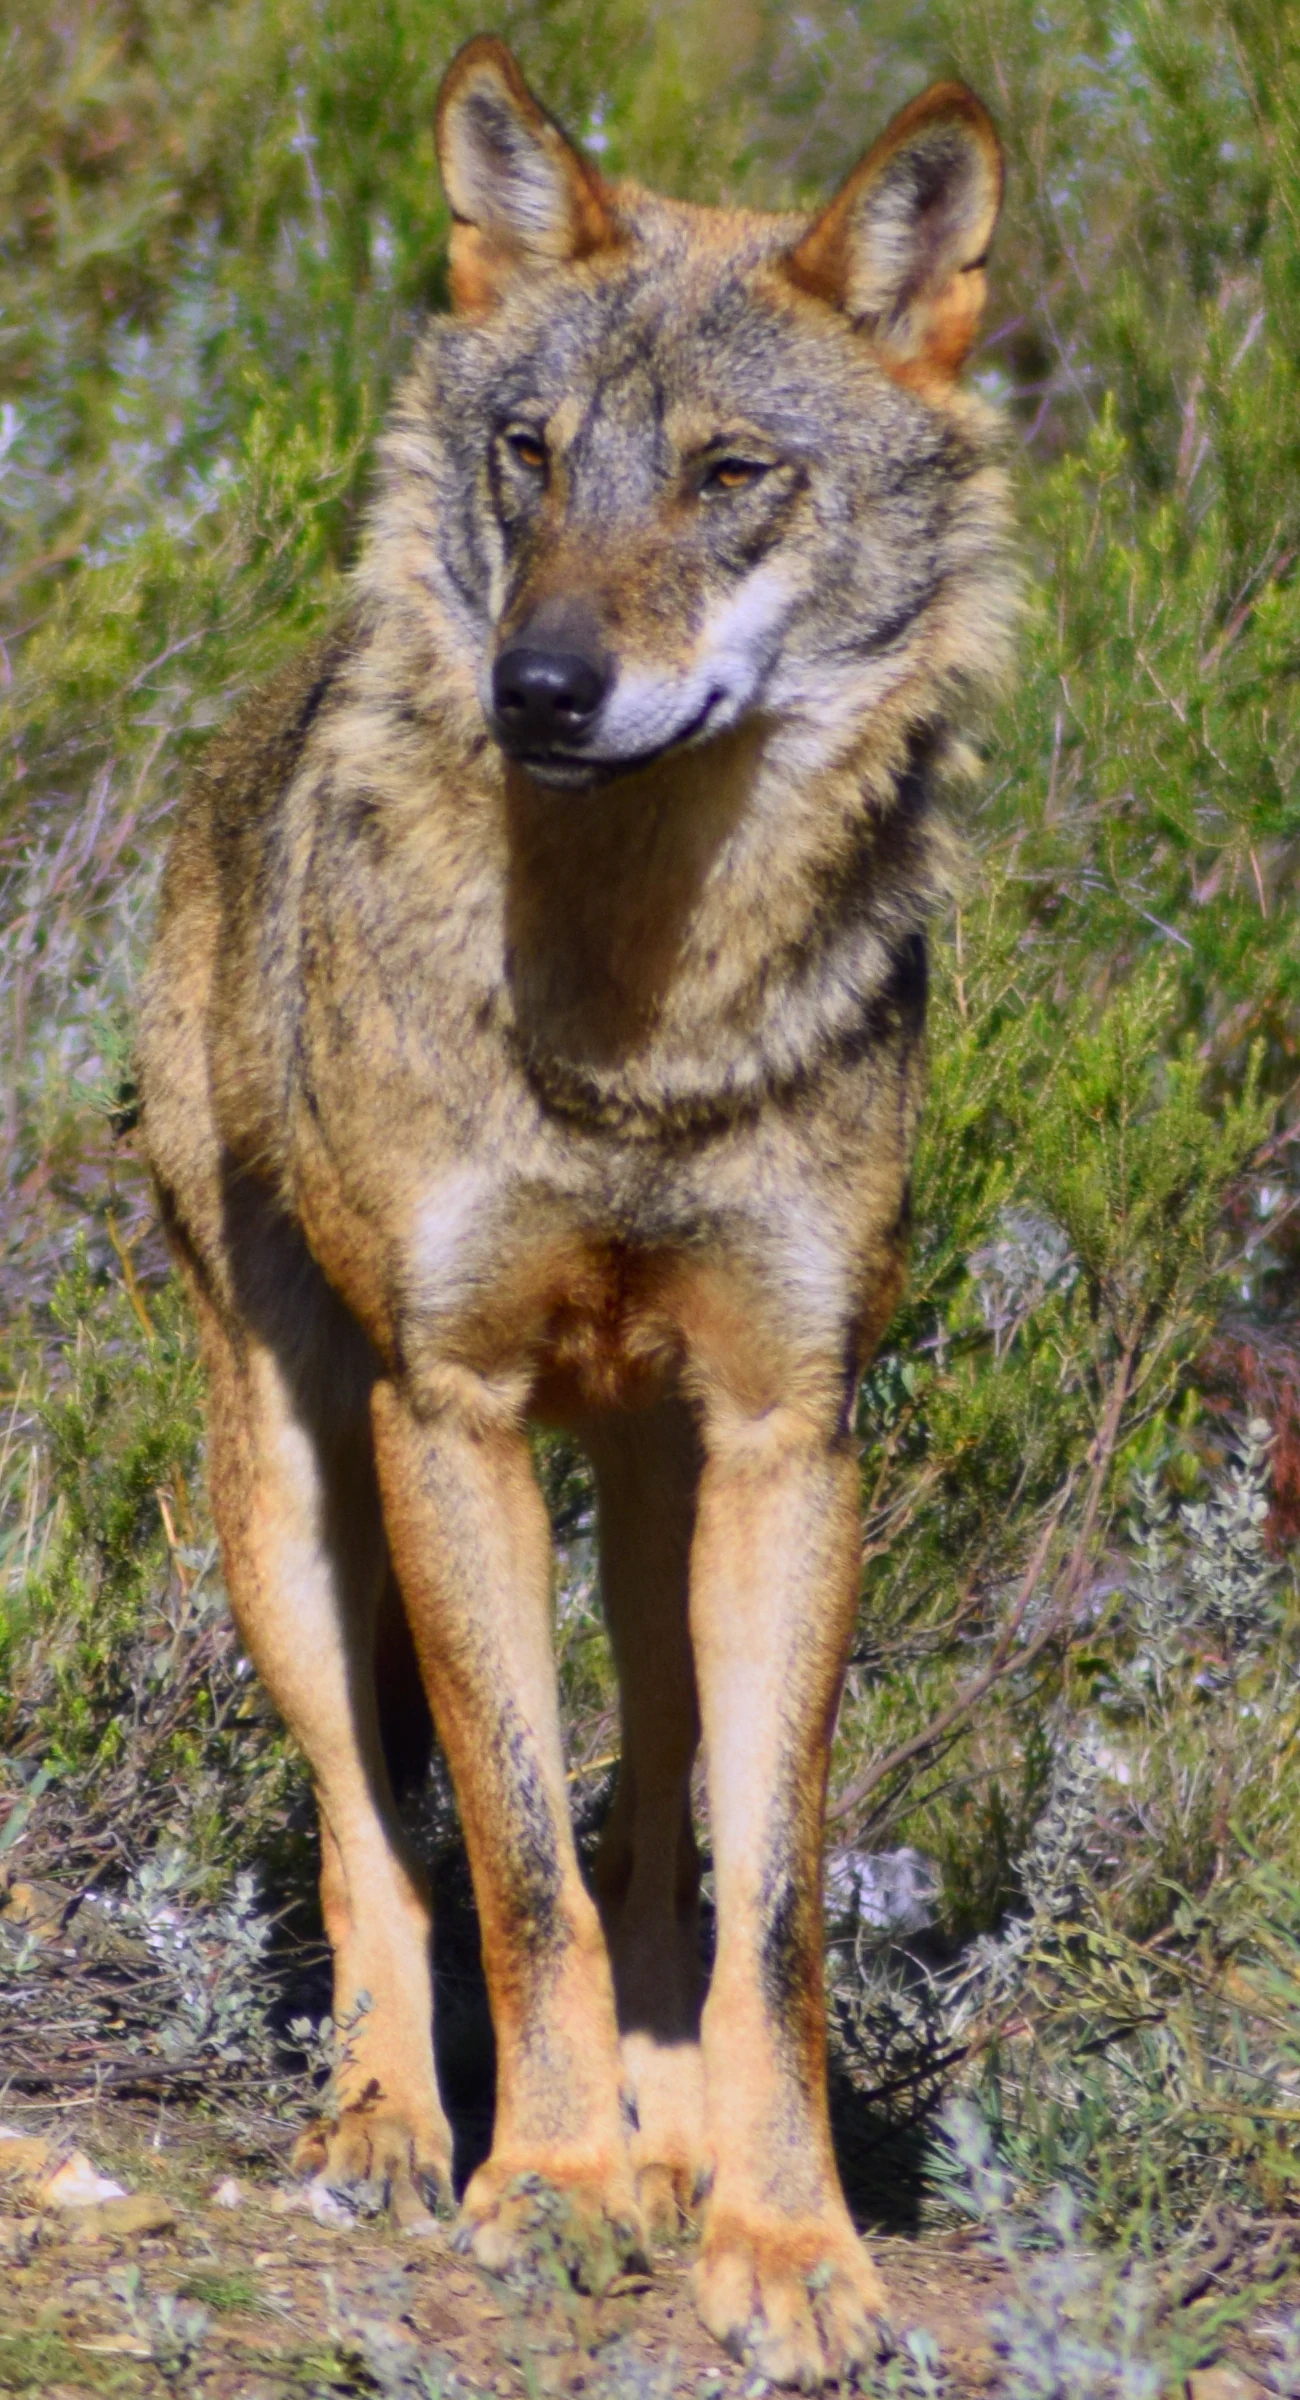 Photograph of an Iberian wolf from the front.